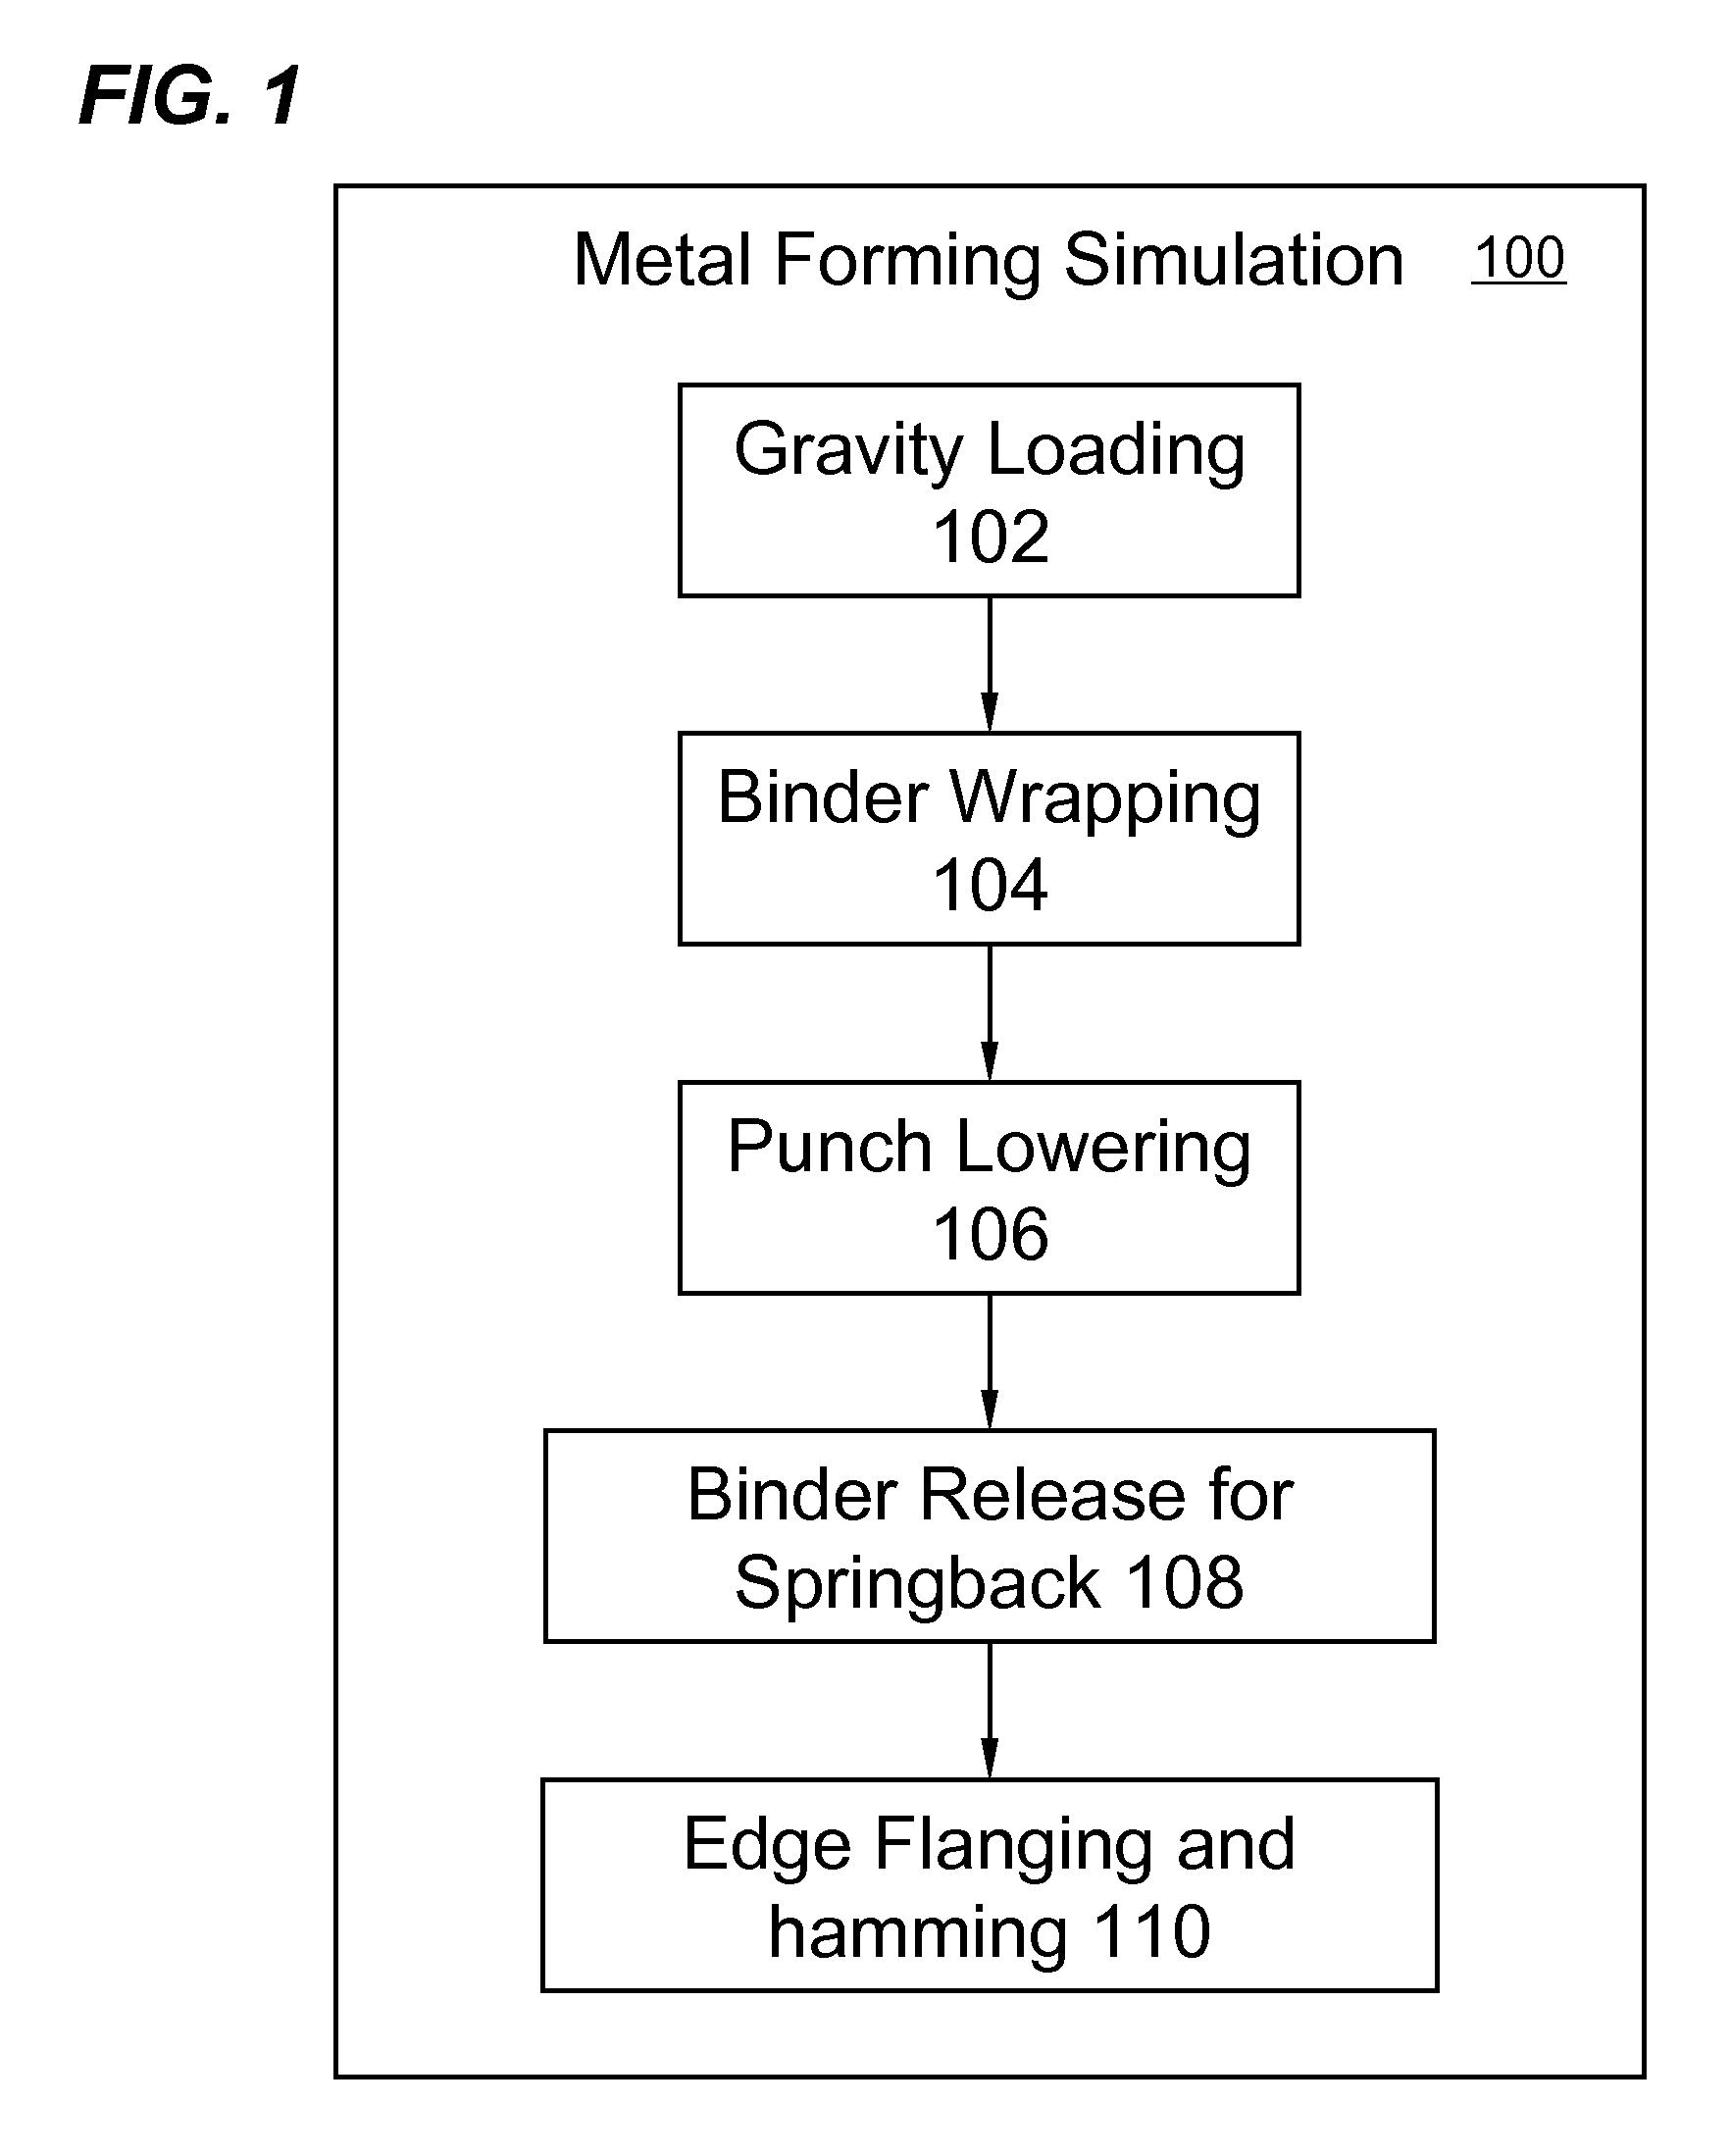 Systems and Methods of Selecting a CAE Analysis Solver with Appropriate Numerical Precision in Each of a Series of Hierarchically Related Engineering Simulations